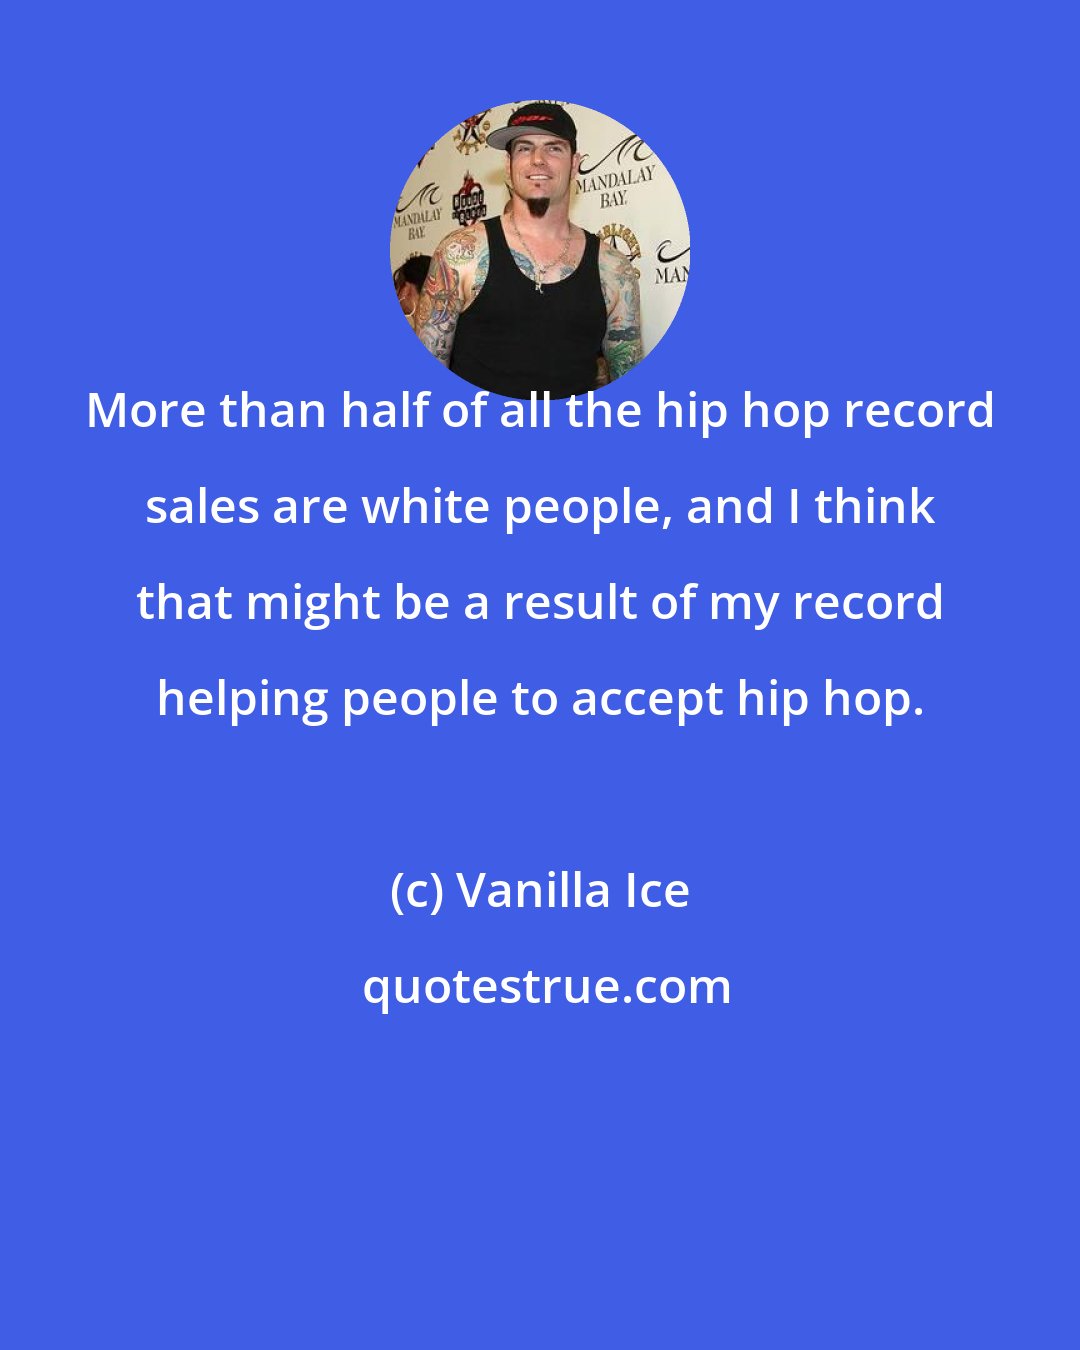 Vanilla Ice: More than half of all the hip hop record sales are white people, and I think that might be a result of my record helping people to accept hip hop.